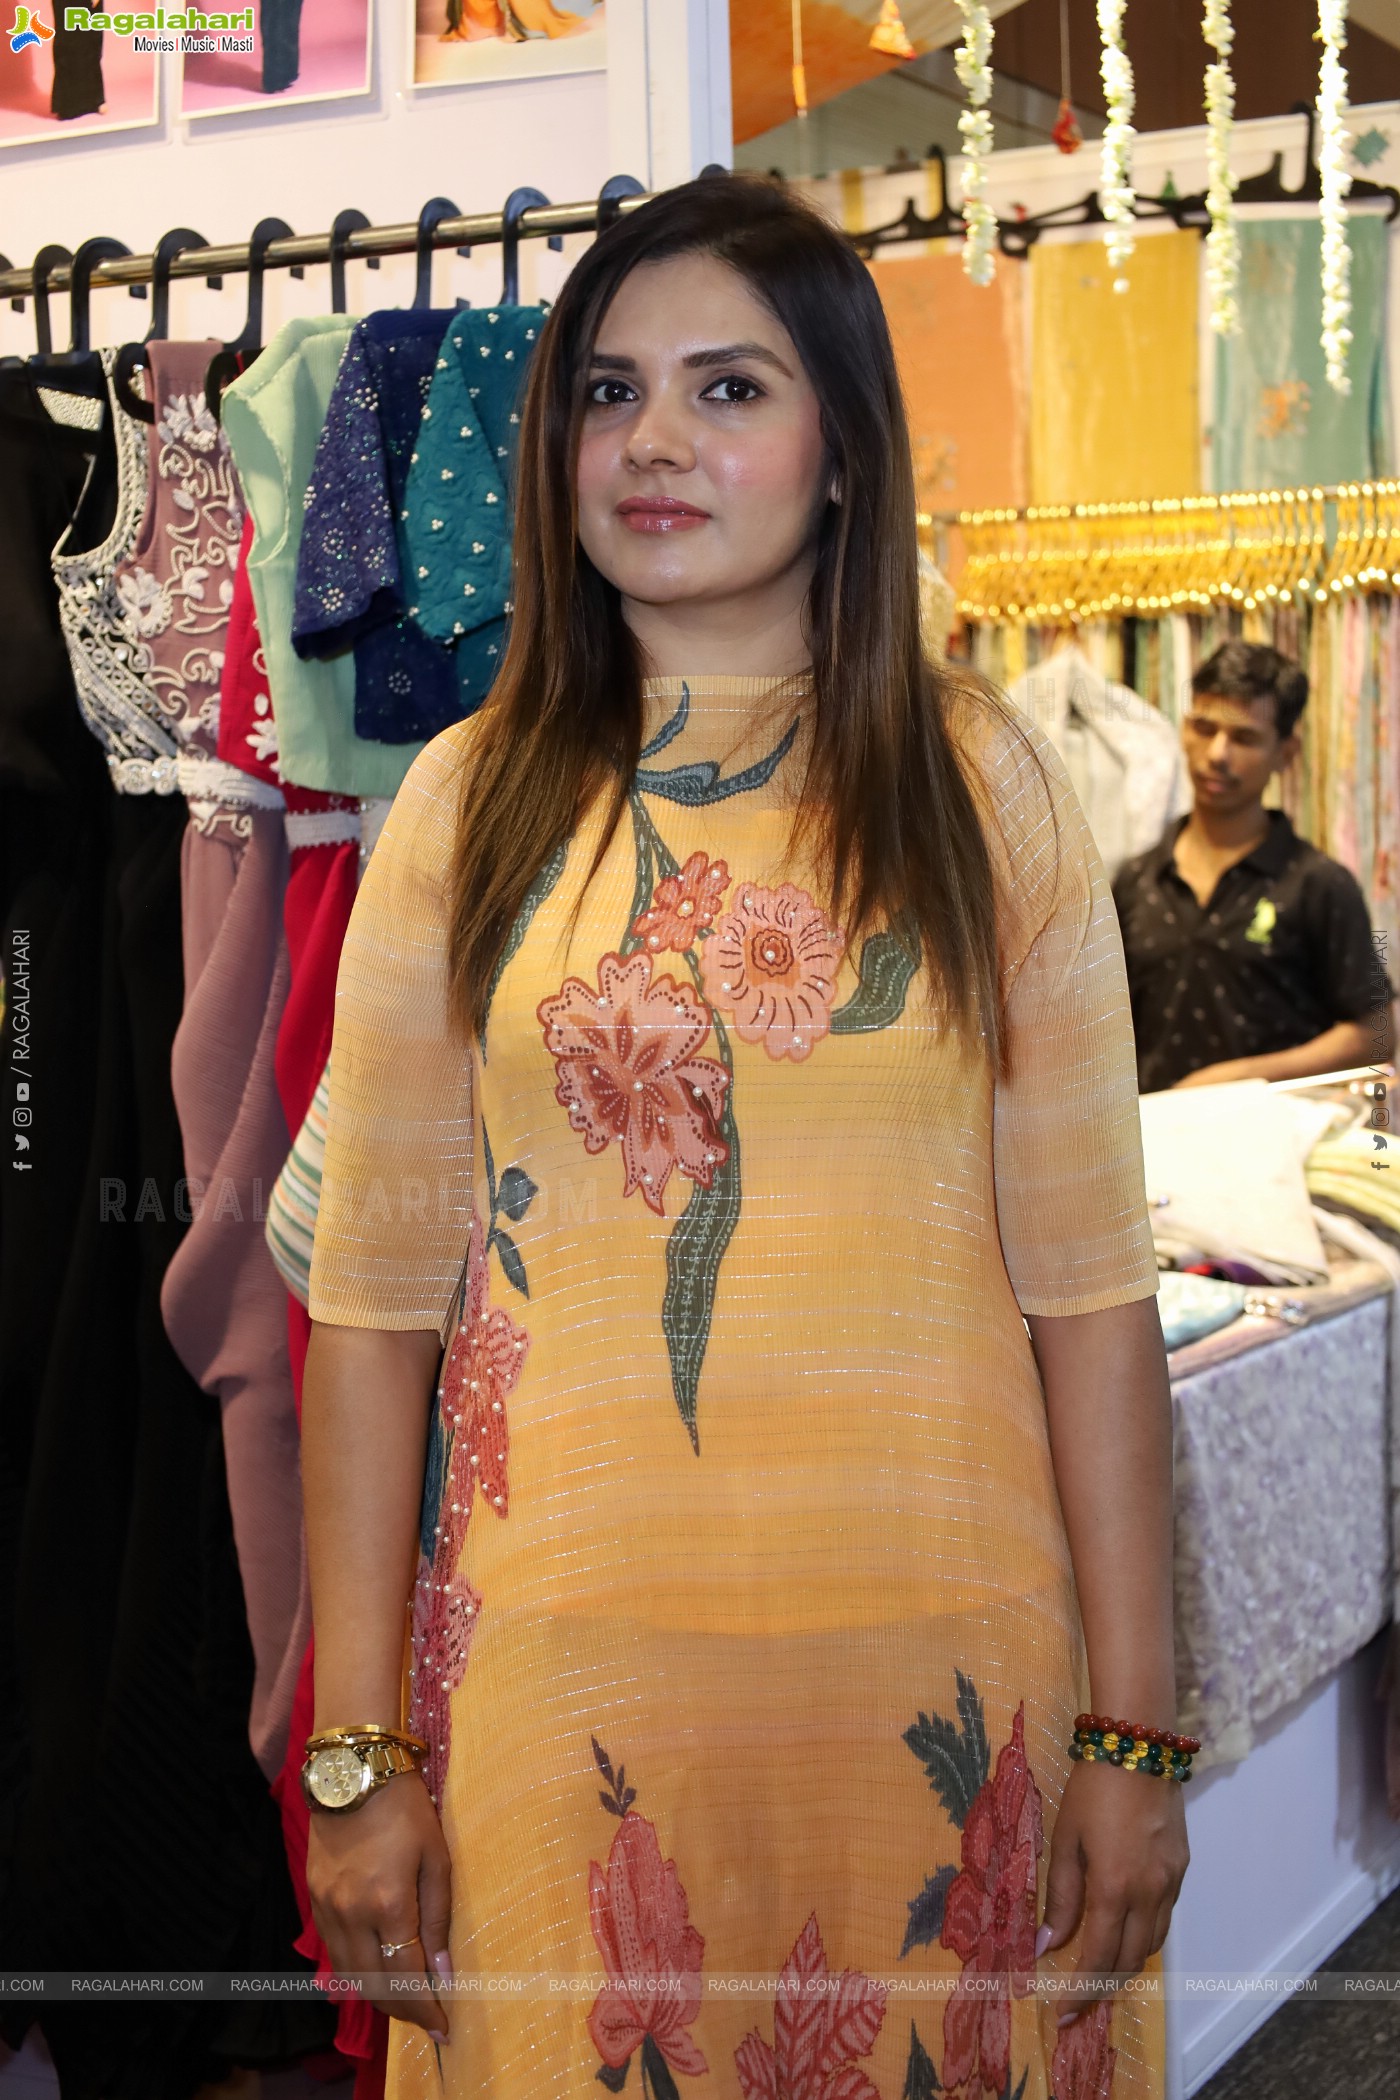 Grand Launch of Hi-Life Exhibition Spring Summer Special Event, Hyderabad